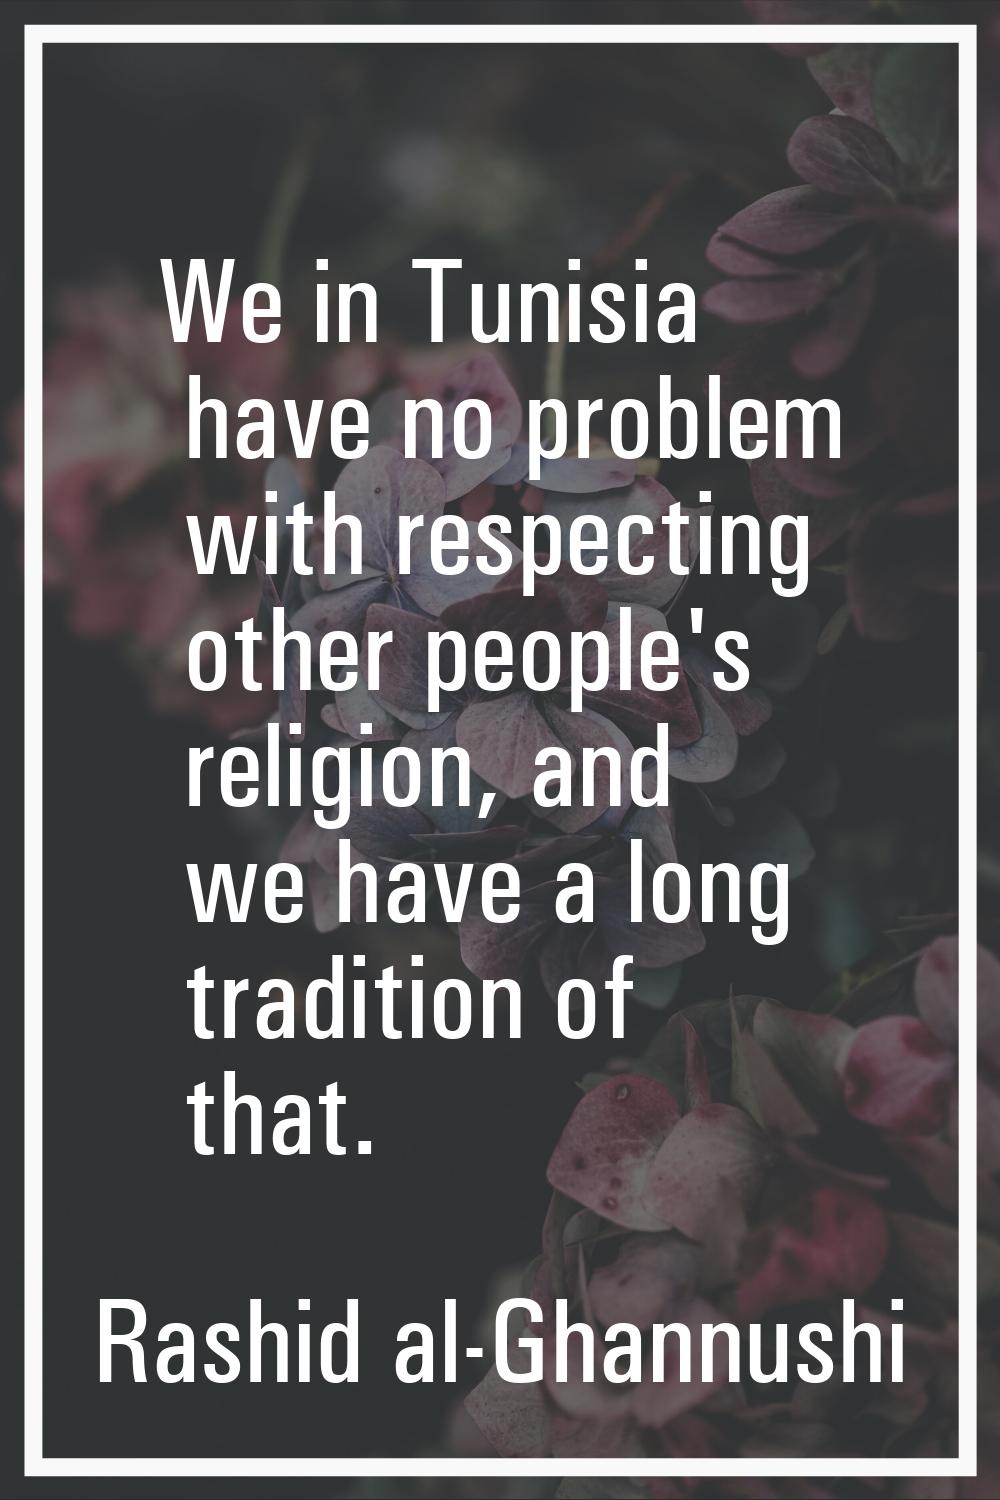 We in Tunisia have no problem with respecting other people's religion, and we have a long tradition